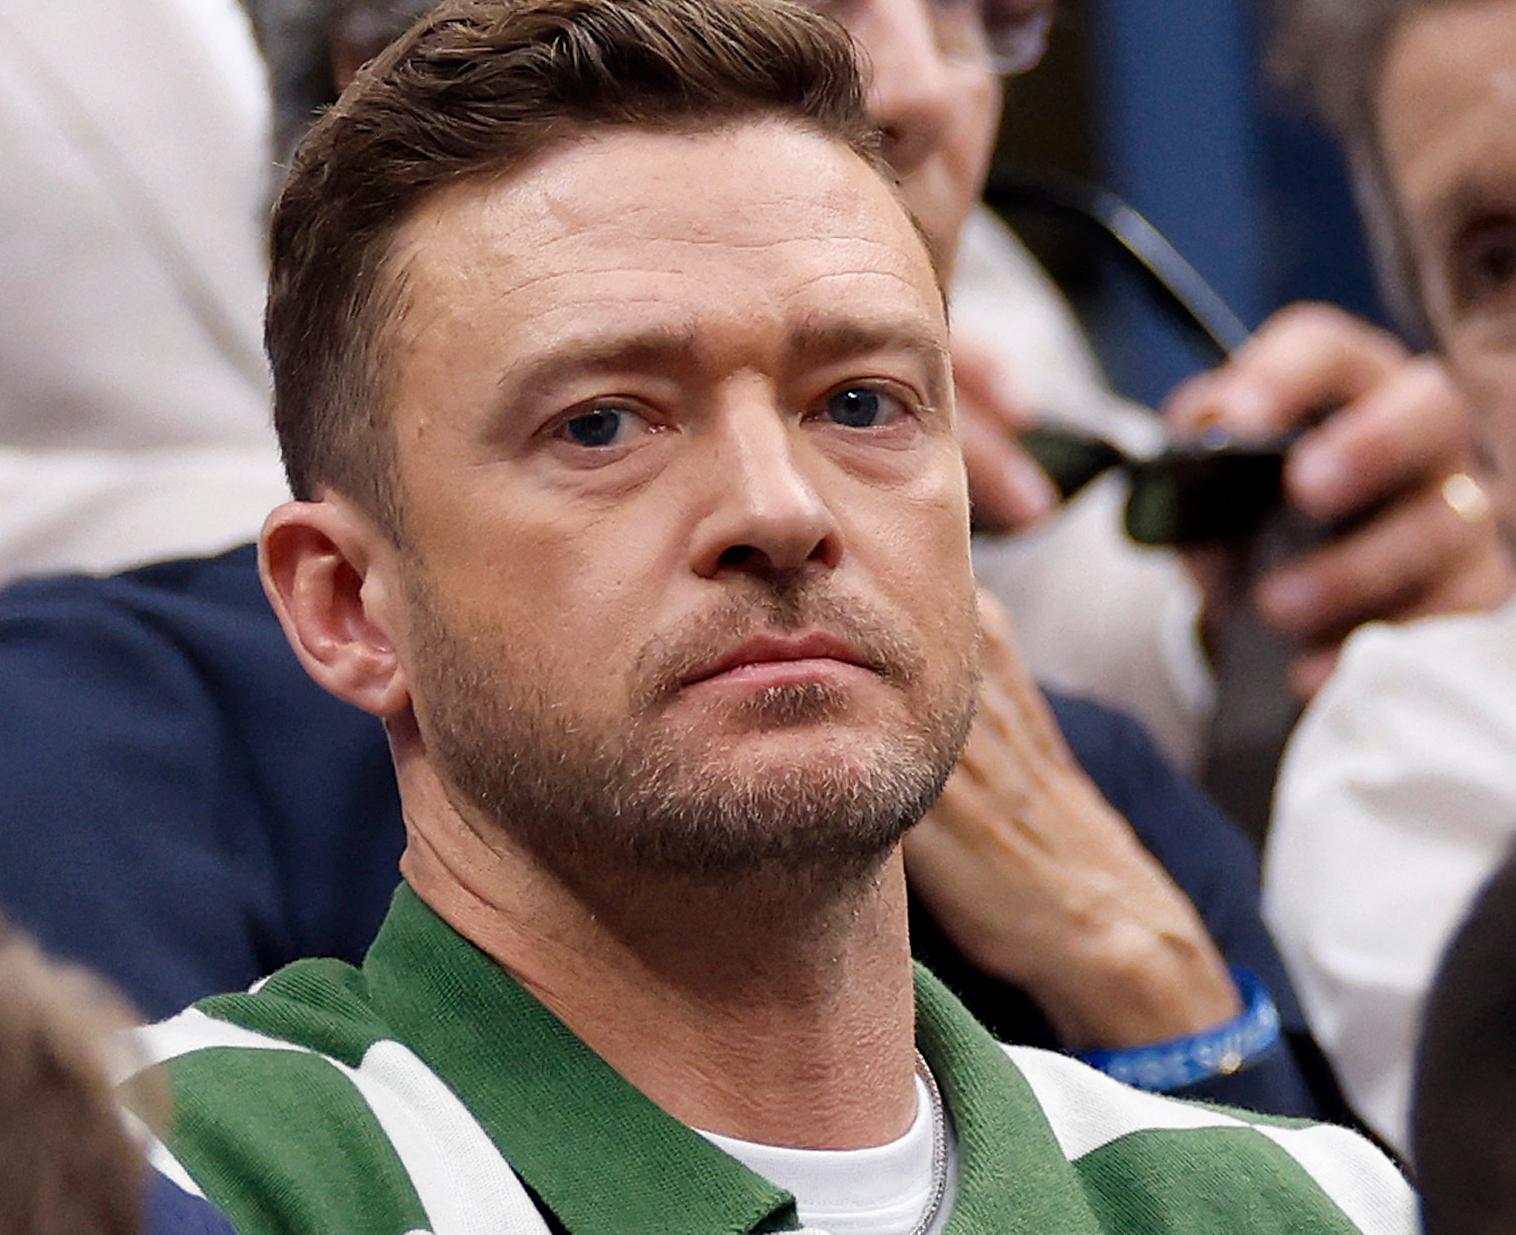 TAOS: Justin Timberlake, here in the stands during a tennis match in New York in September.